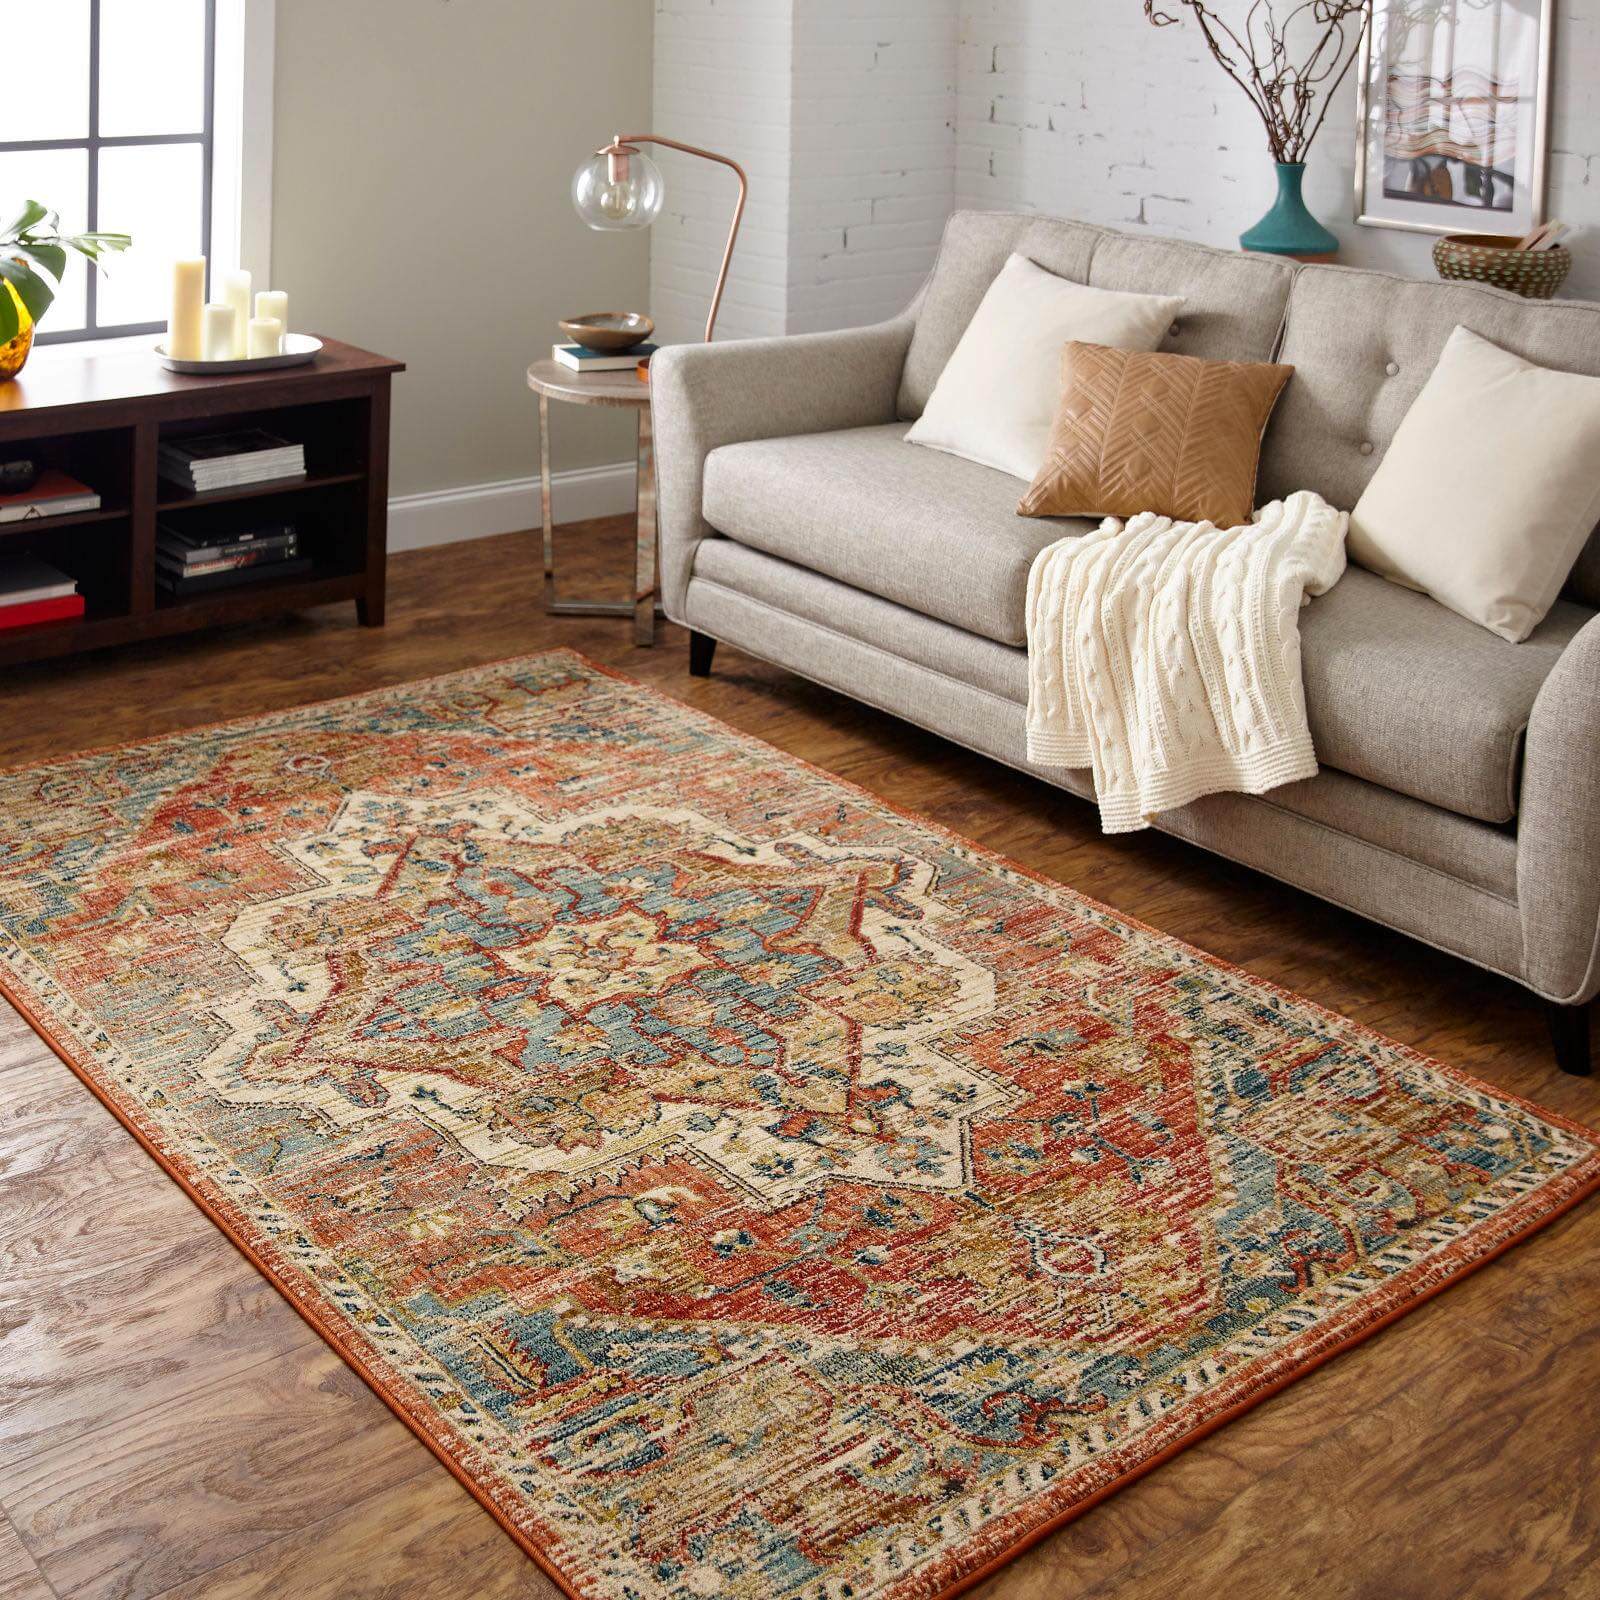 Rug | Carpet And Floors For Less